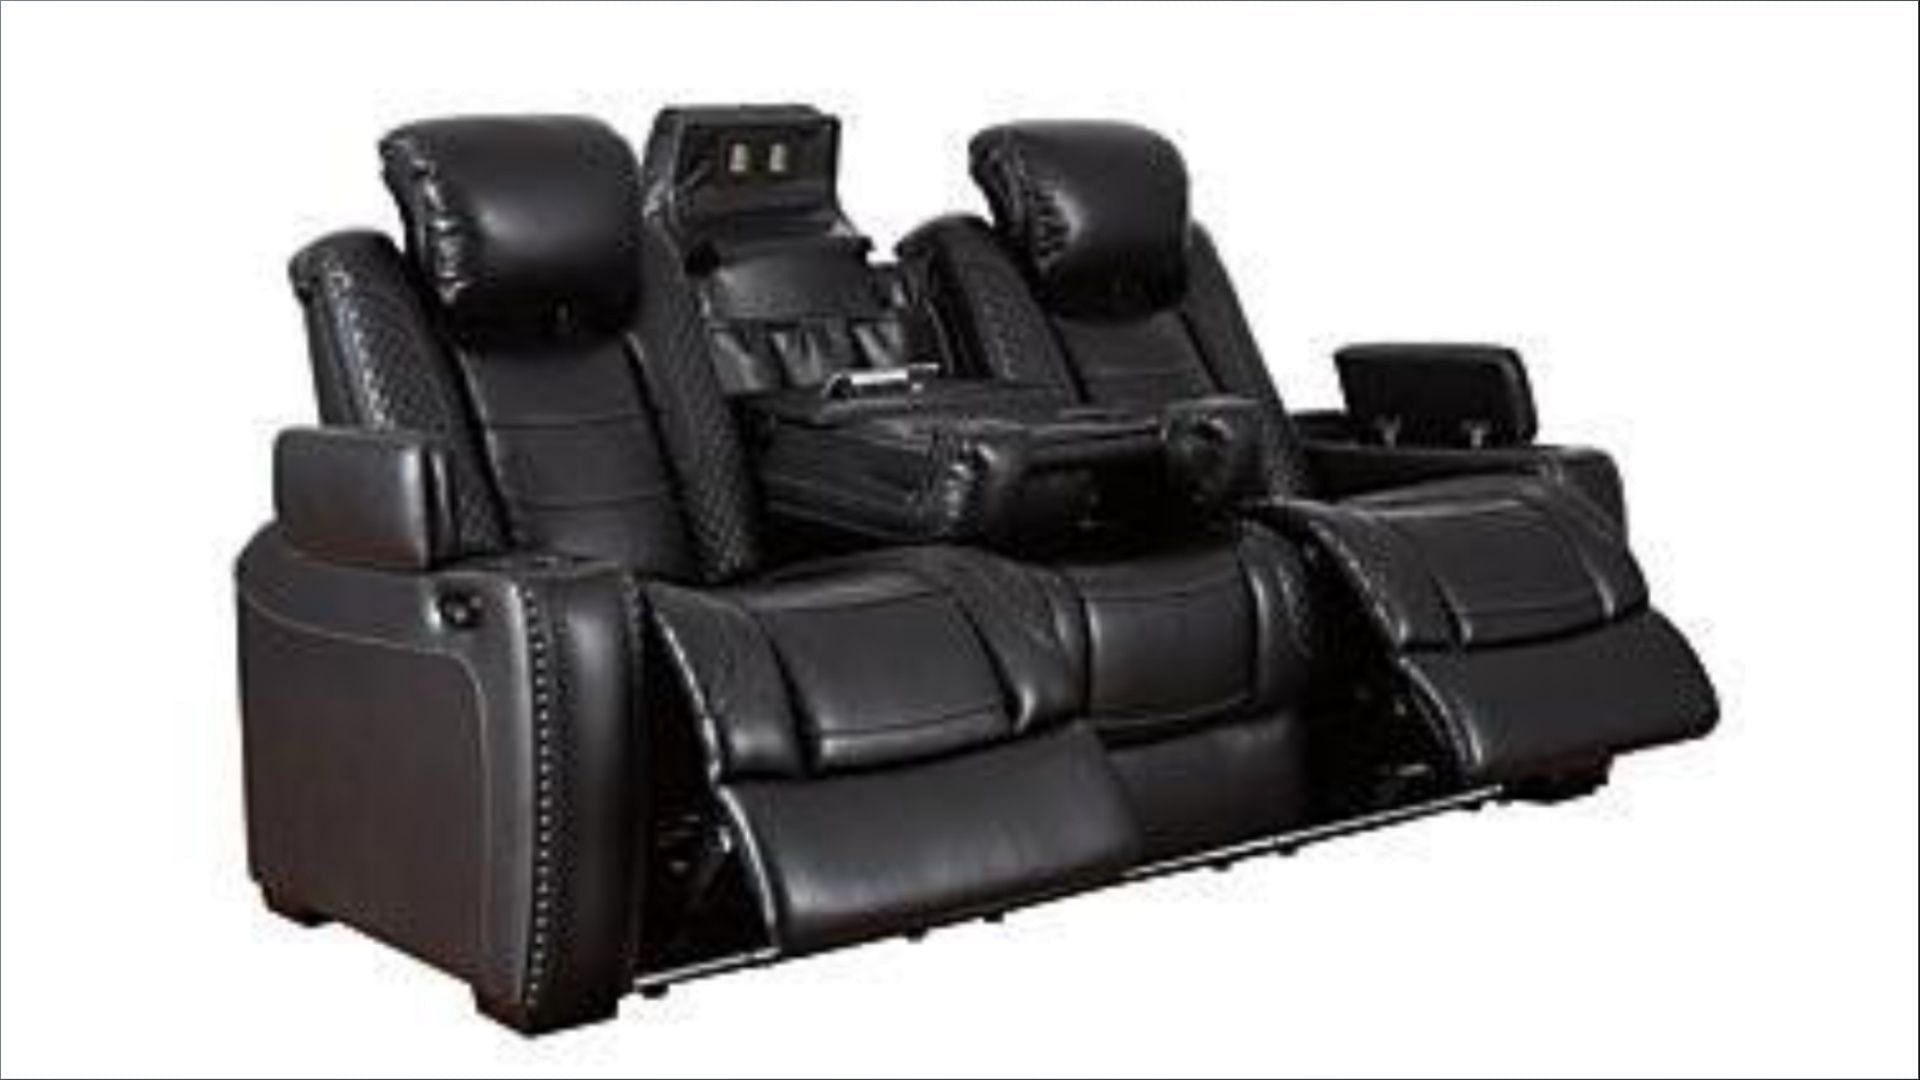 The recalled Party Time Power Recliners sold in black can pose a fire risk (Image via CPSC)